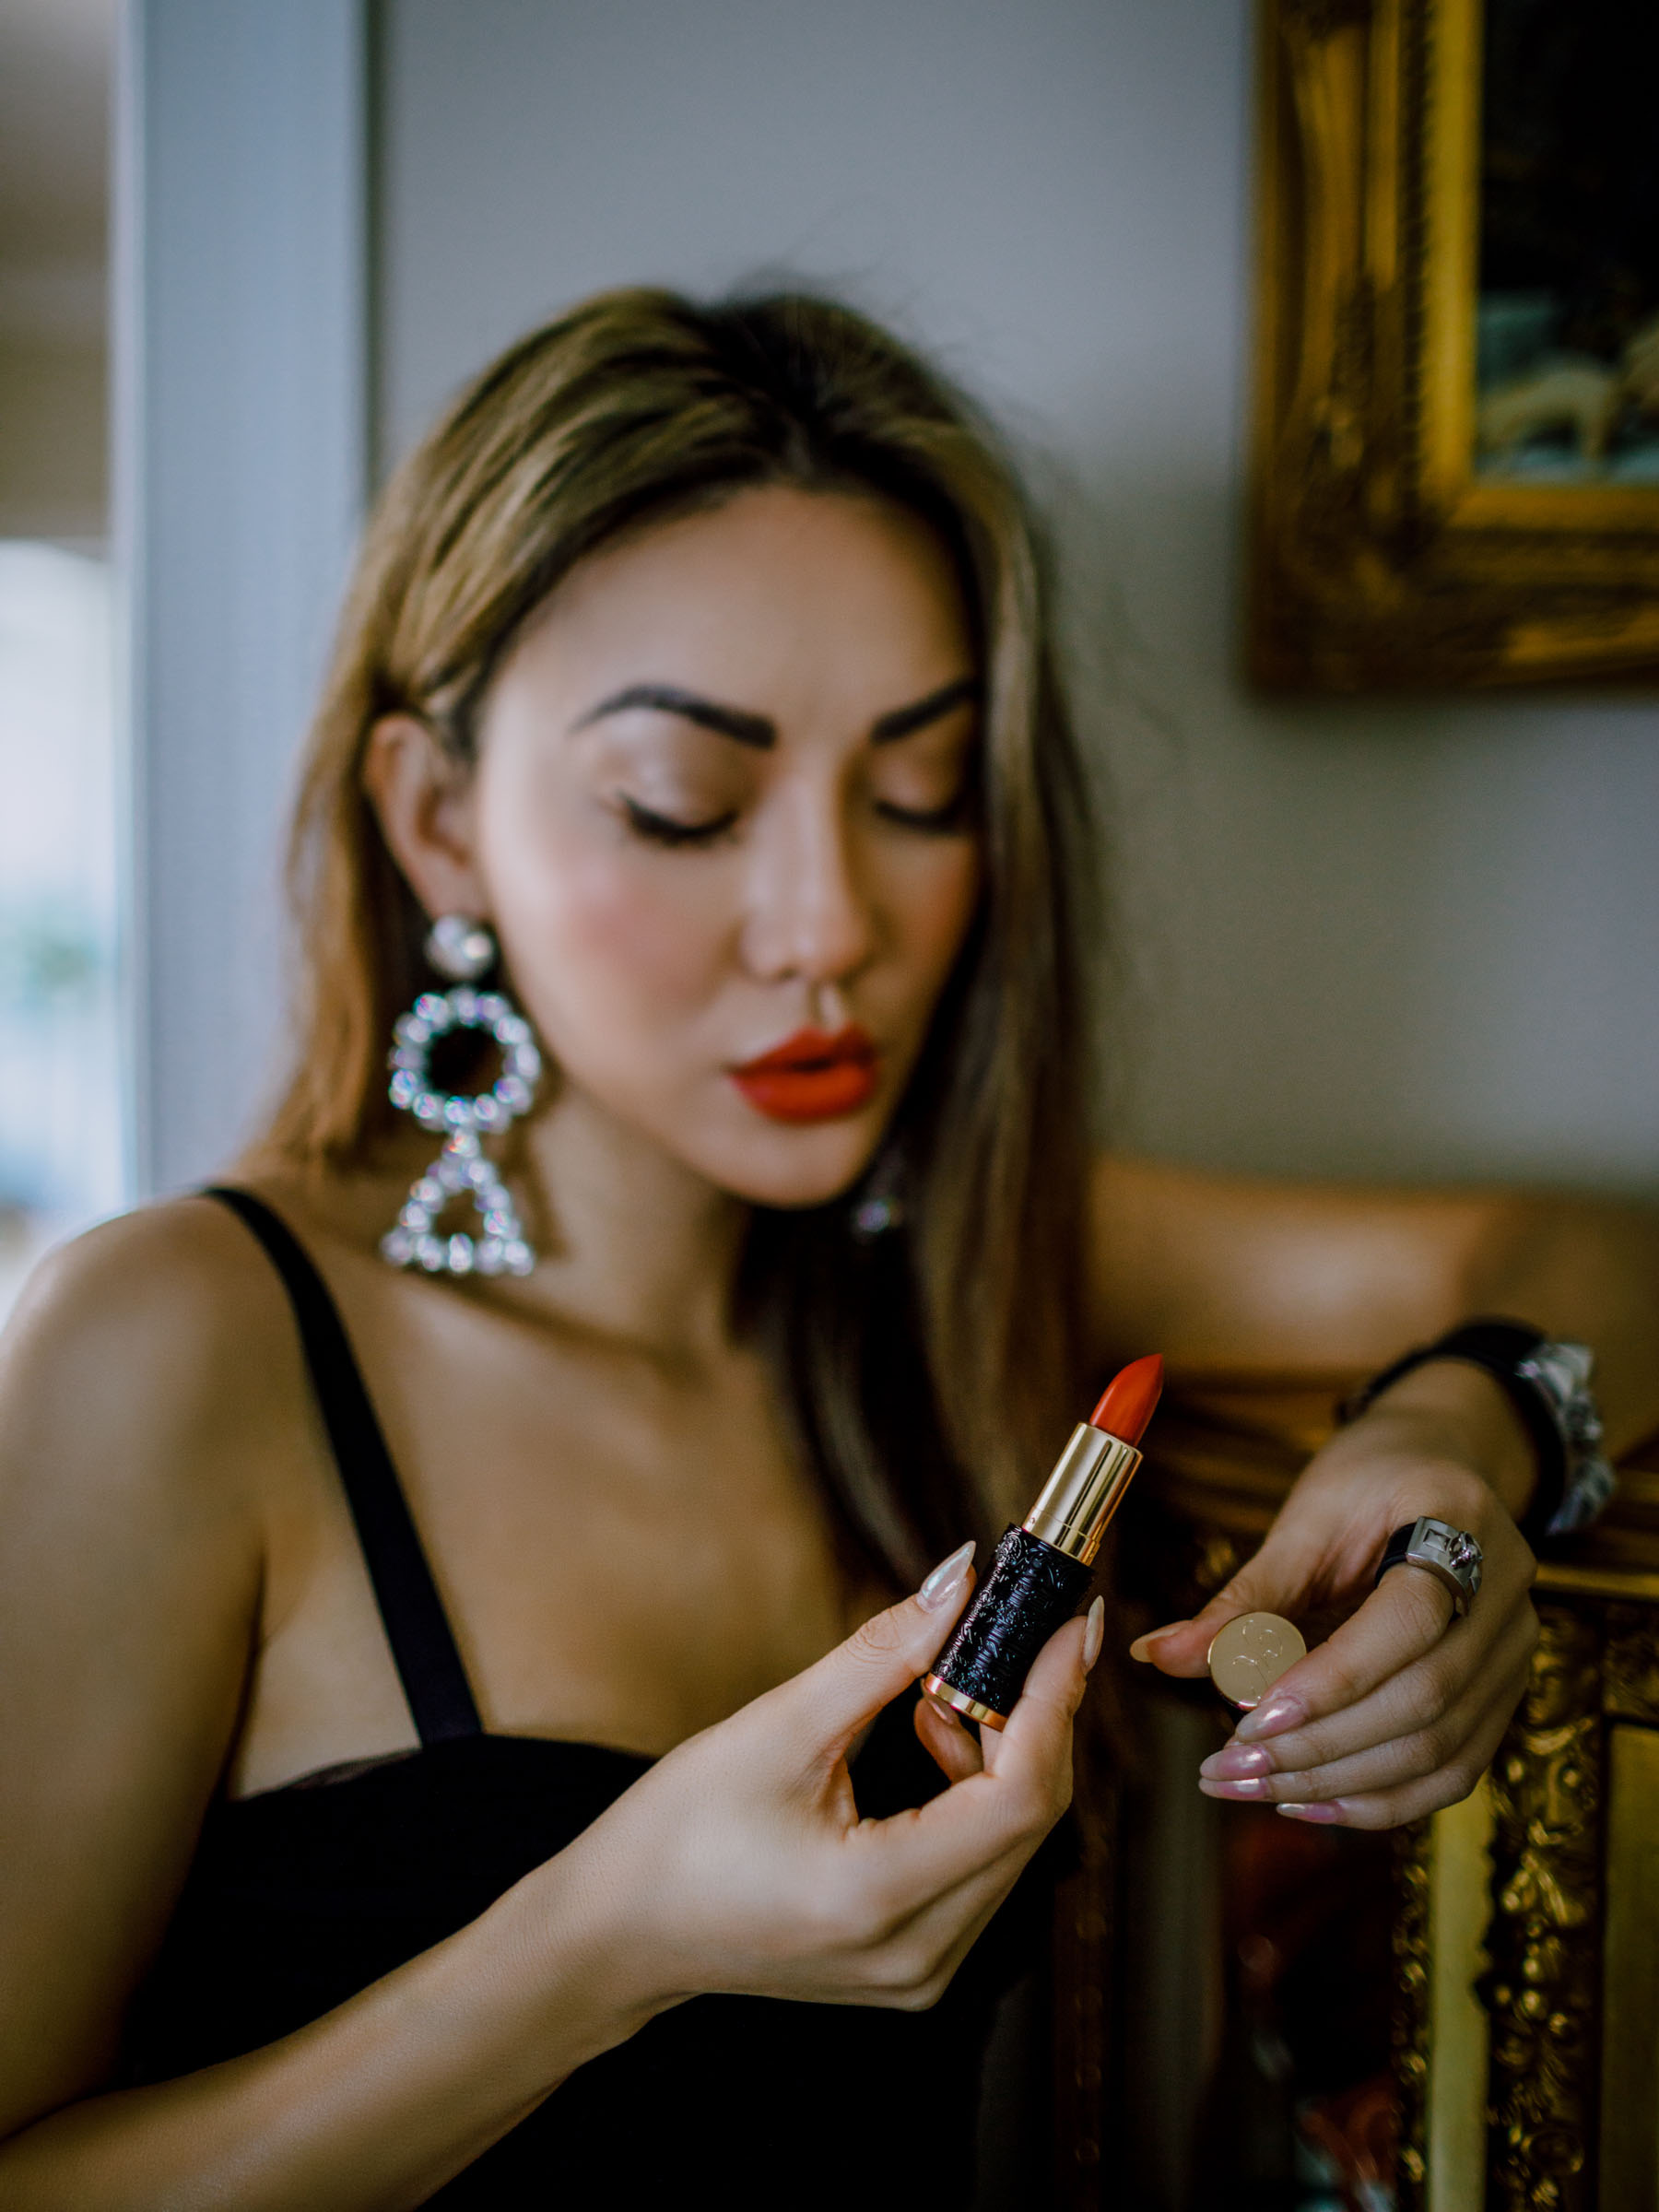 favorite products for congested skin, red lipstick // Notjessfashion.com